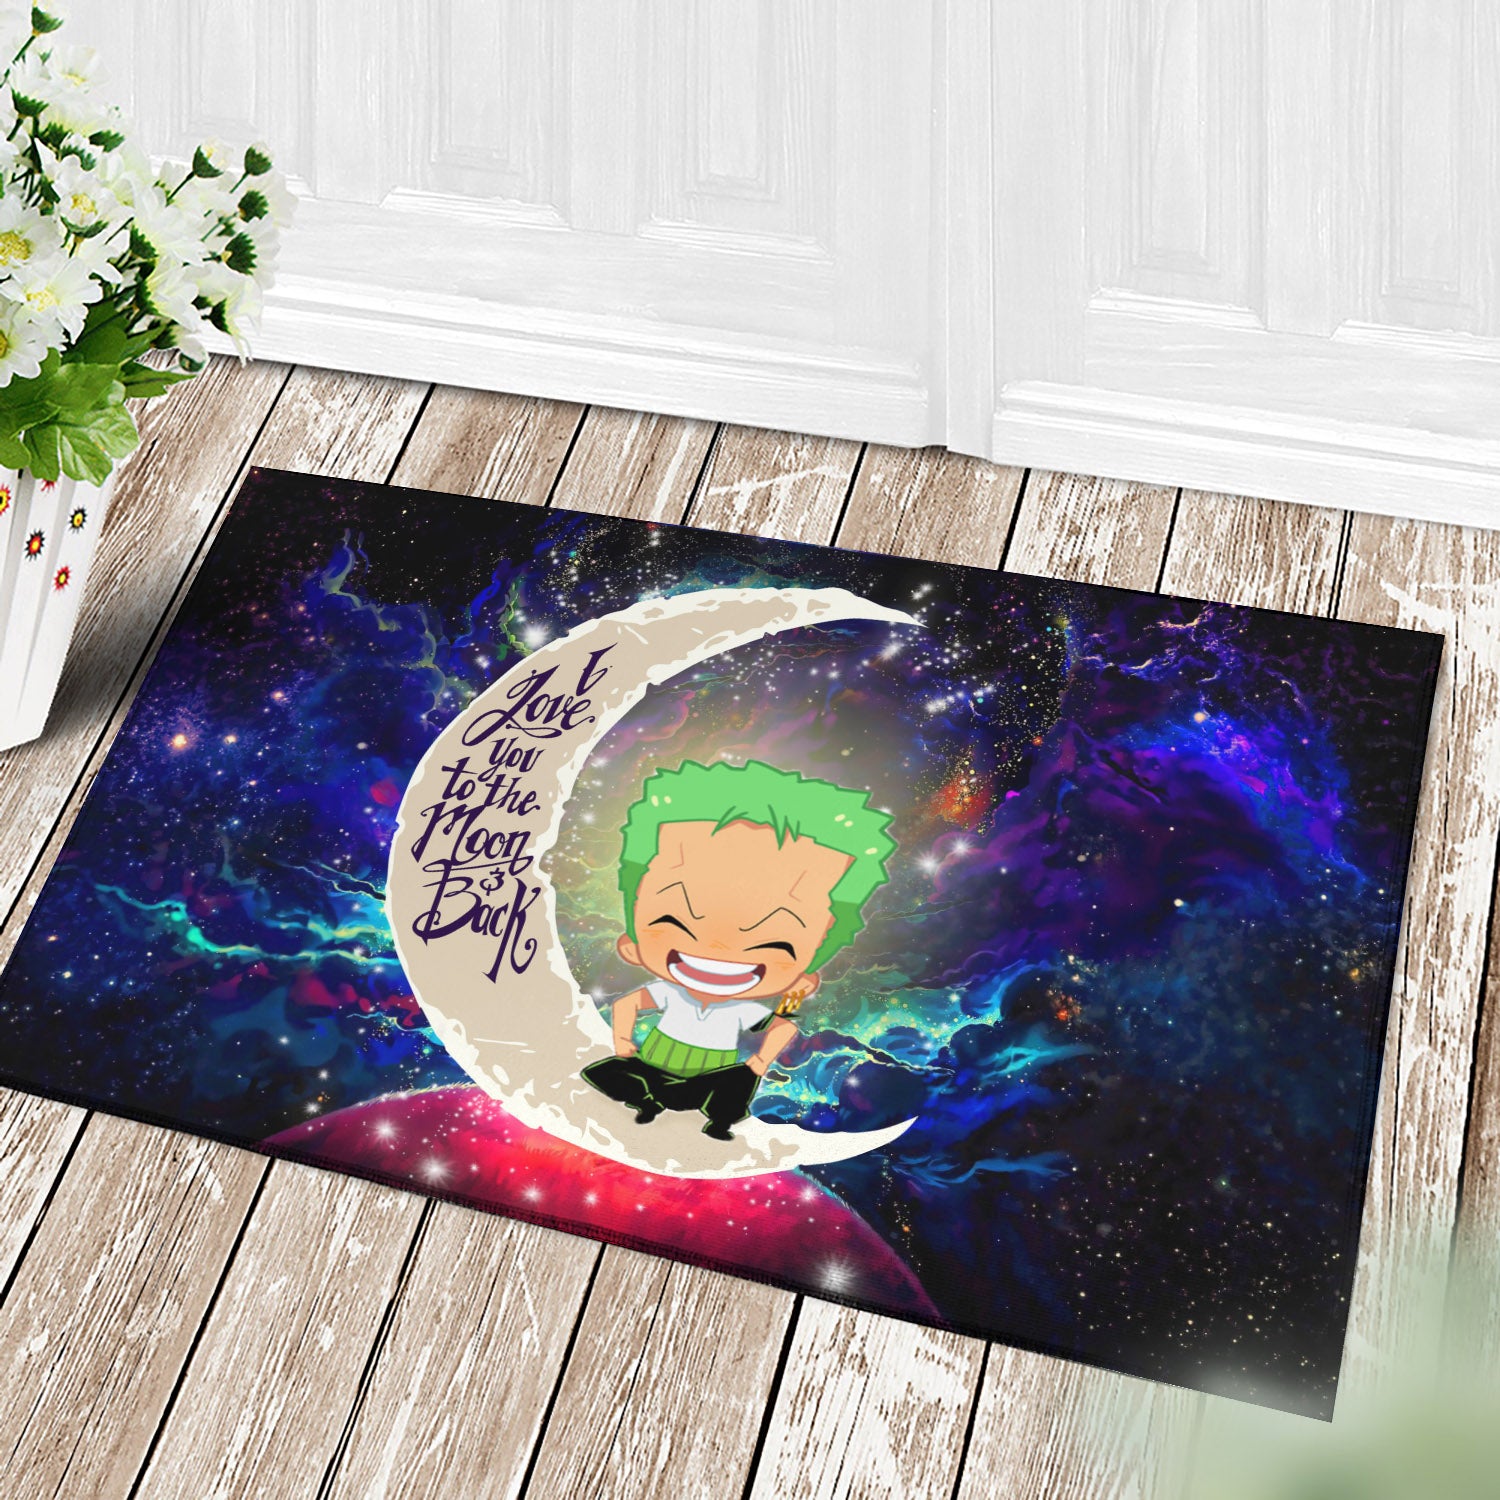 Zoro One Piece Love You To The Moon Galaxy Back Door Mats Home Decor